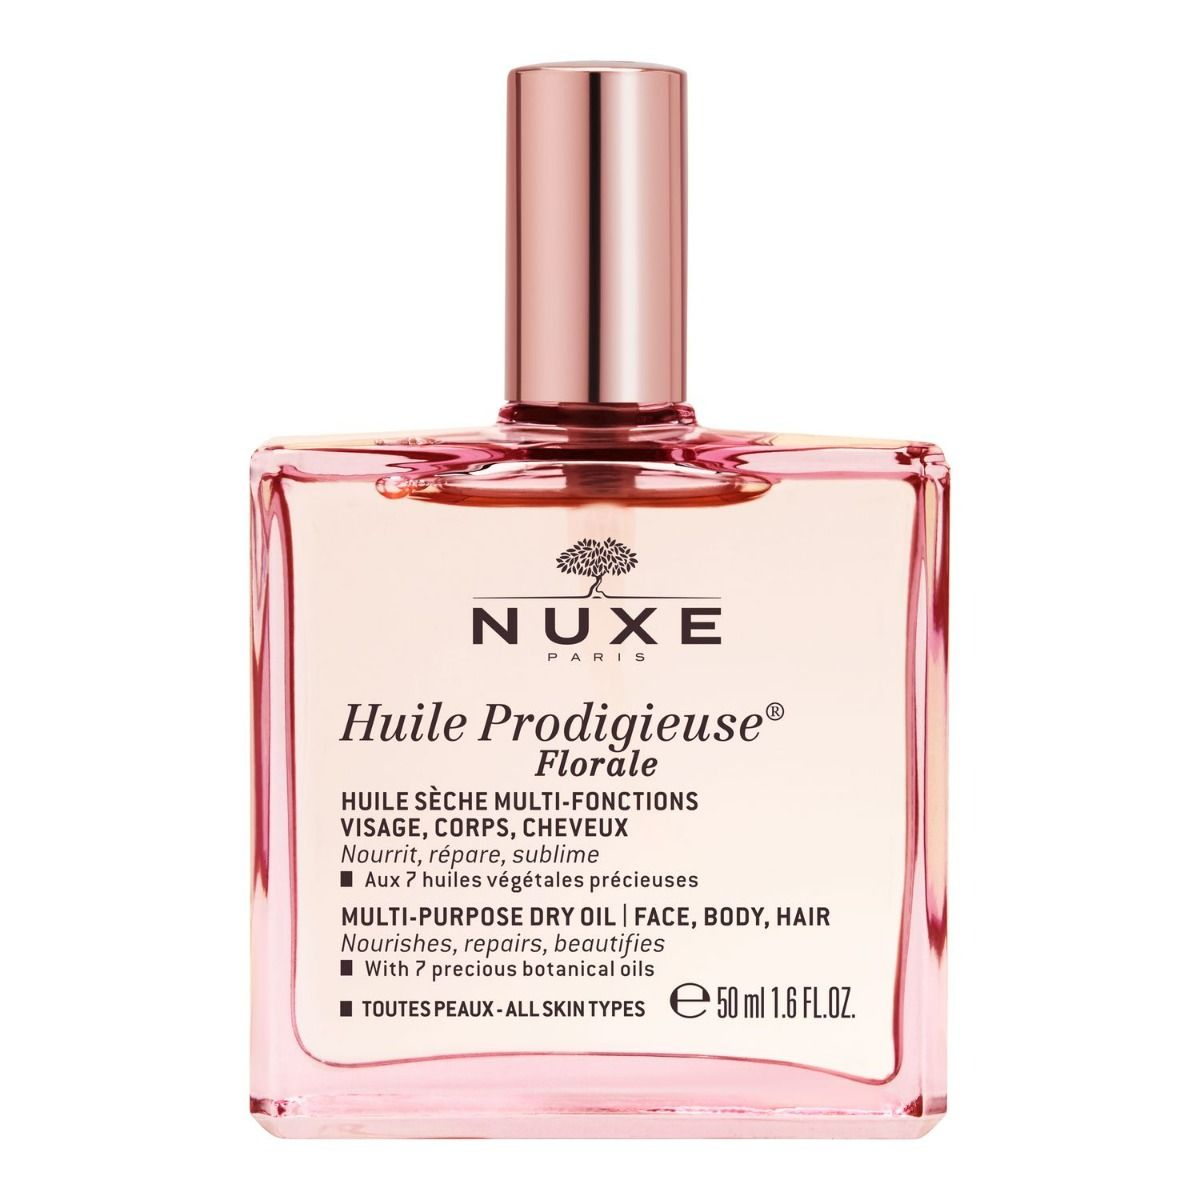 Nuxe Huile Prodigieuse Florale масло для лица, тела и волос, 50 ml nuxe масло для тела huile prodigieuse florale 100 мл